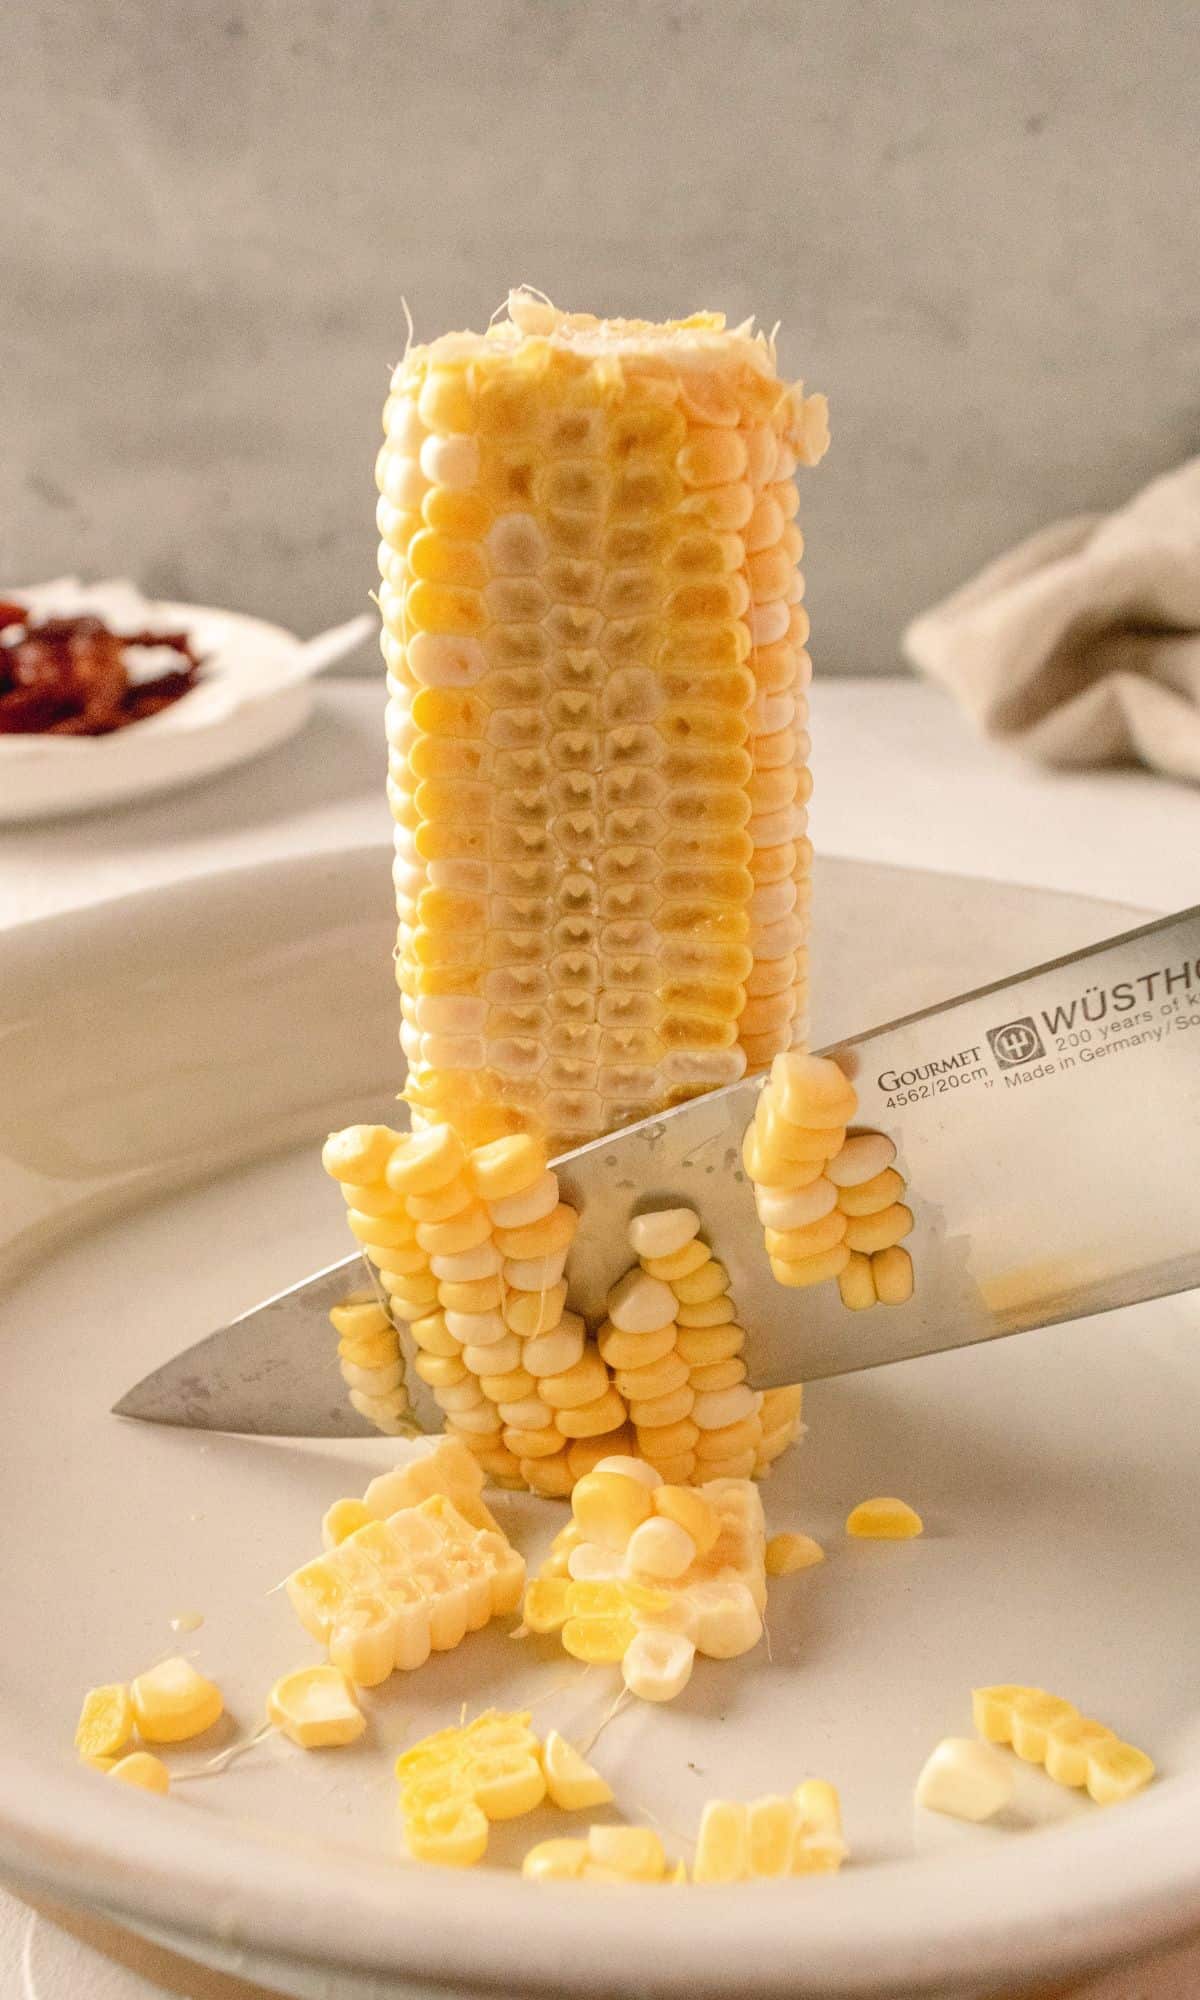 Cutting corn off of a corn cob with a large knife.